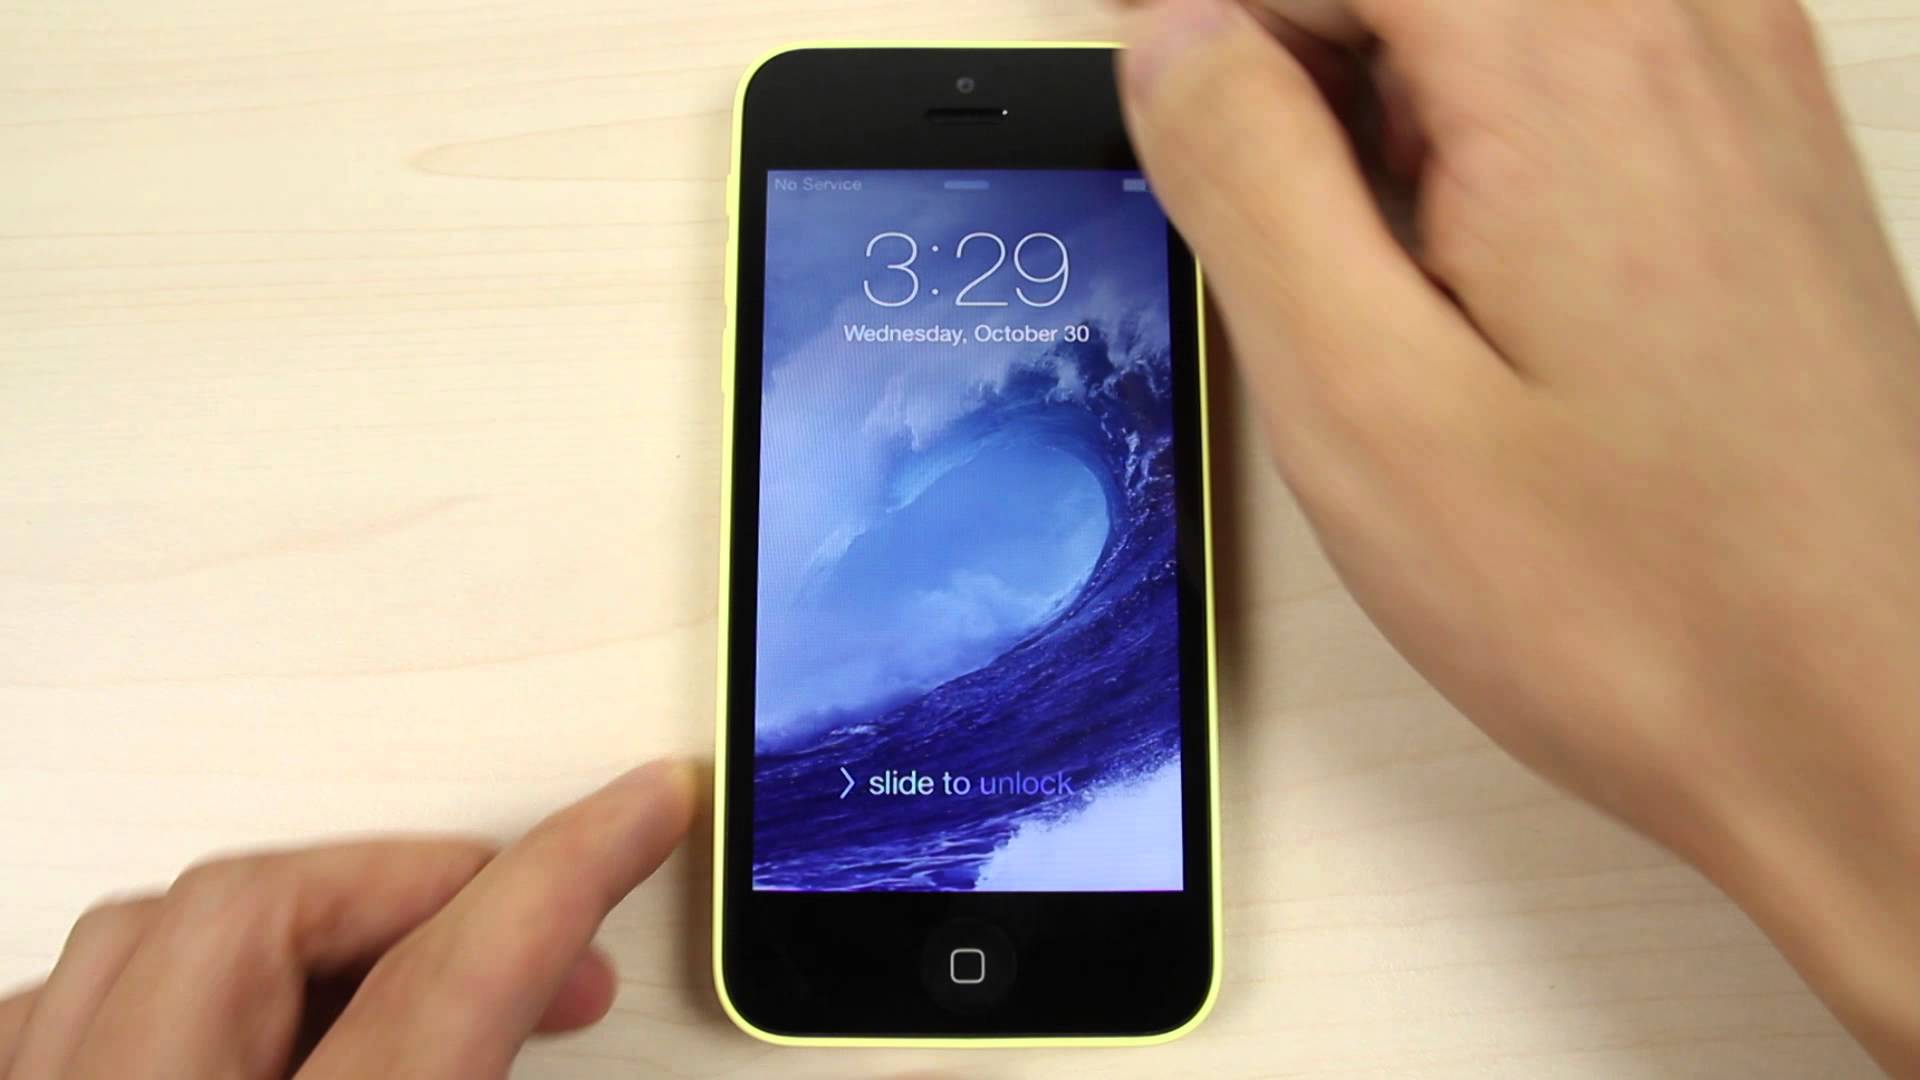 The Home Screen And Lock Wallpaper On Apple iPhone 5c